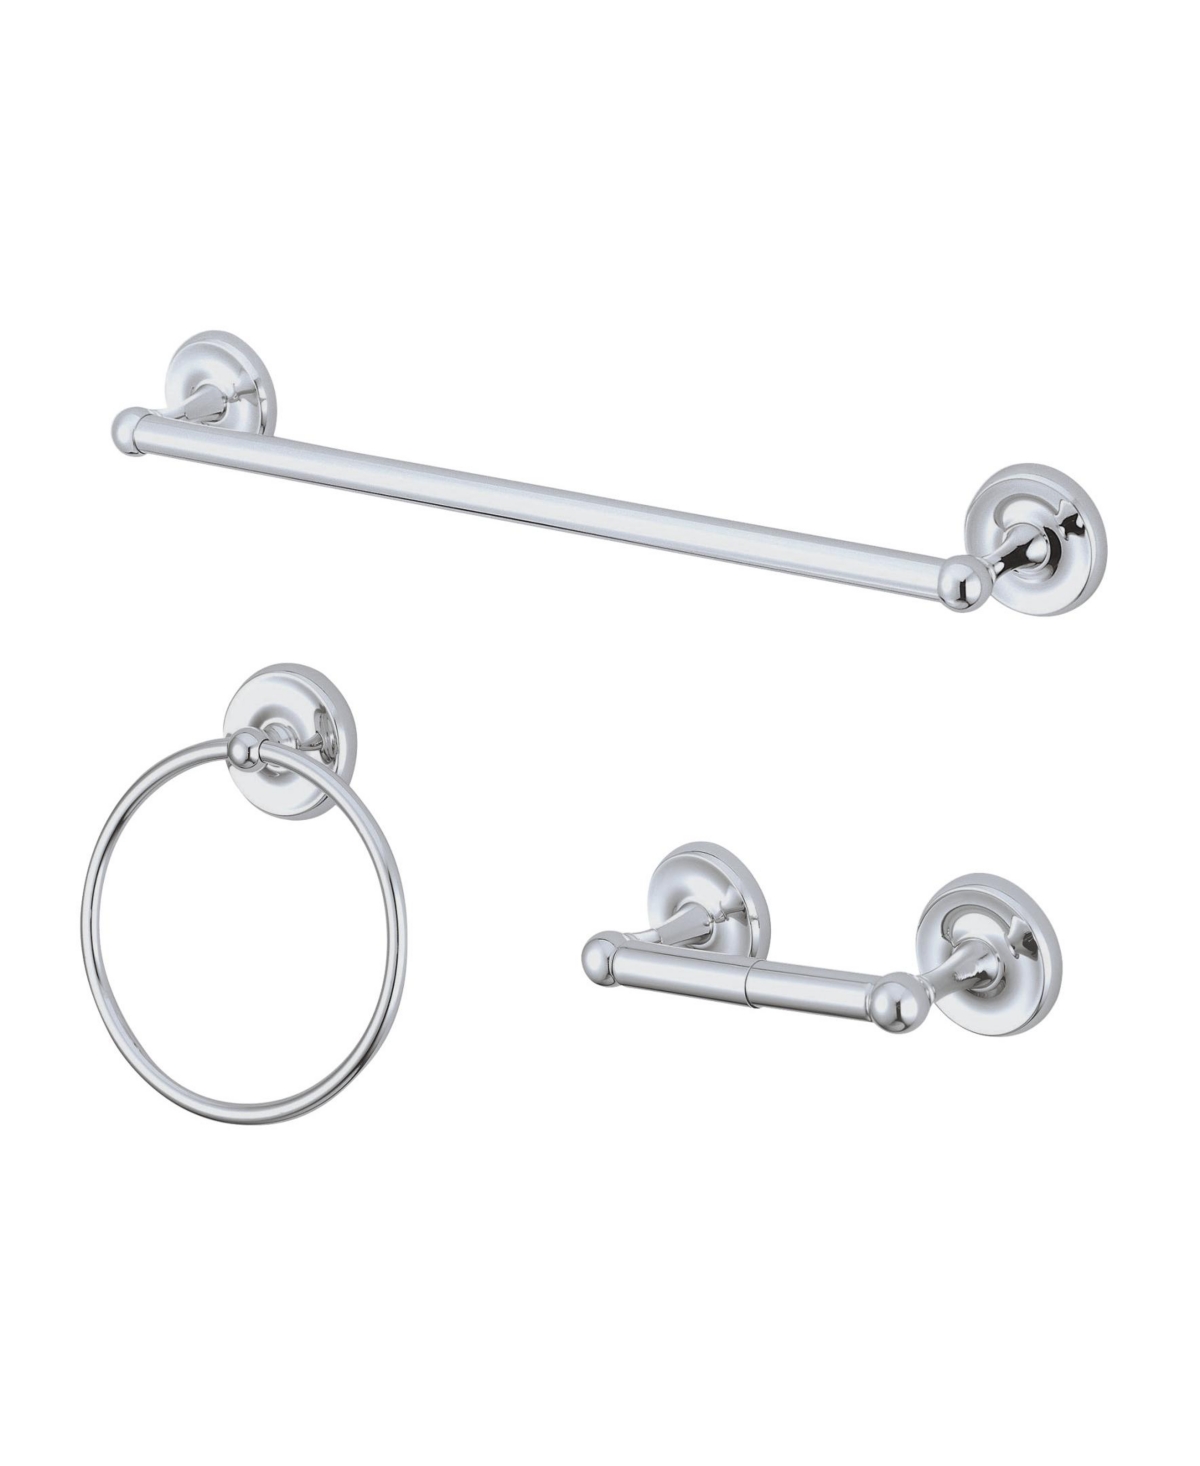 Kingston Brass Victorian 3-Pc. Bathroom Accessory Combo in Polished Chrome Bedding